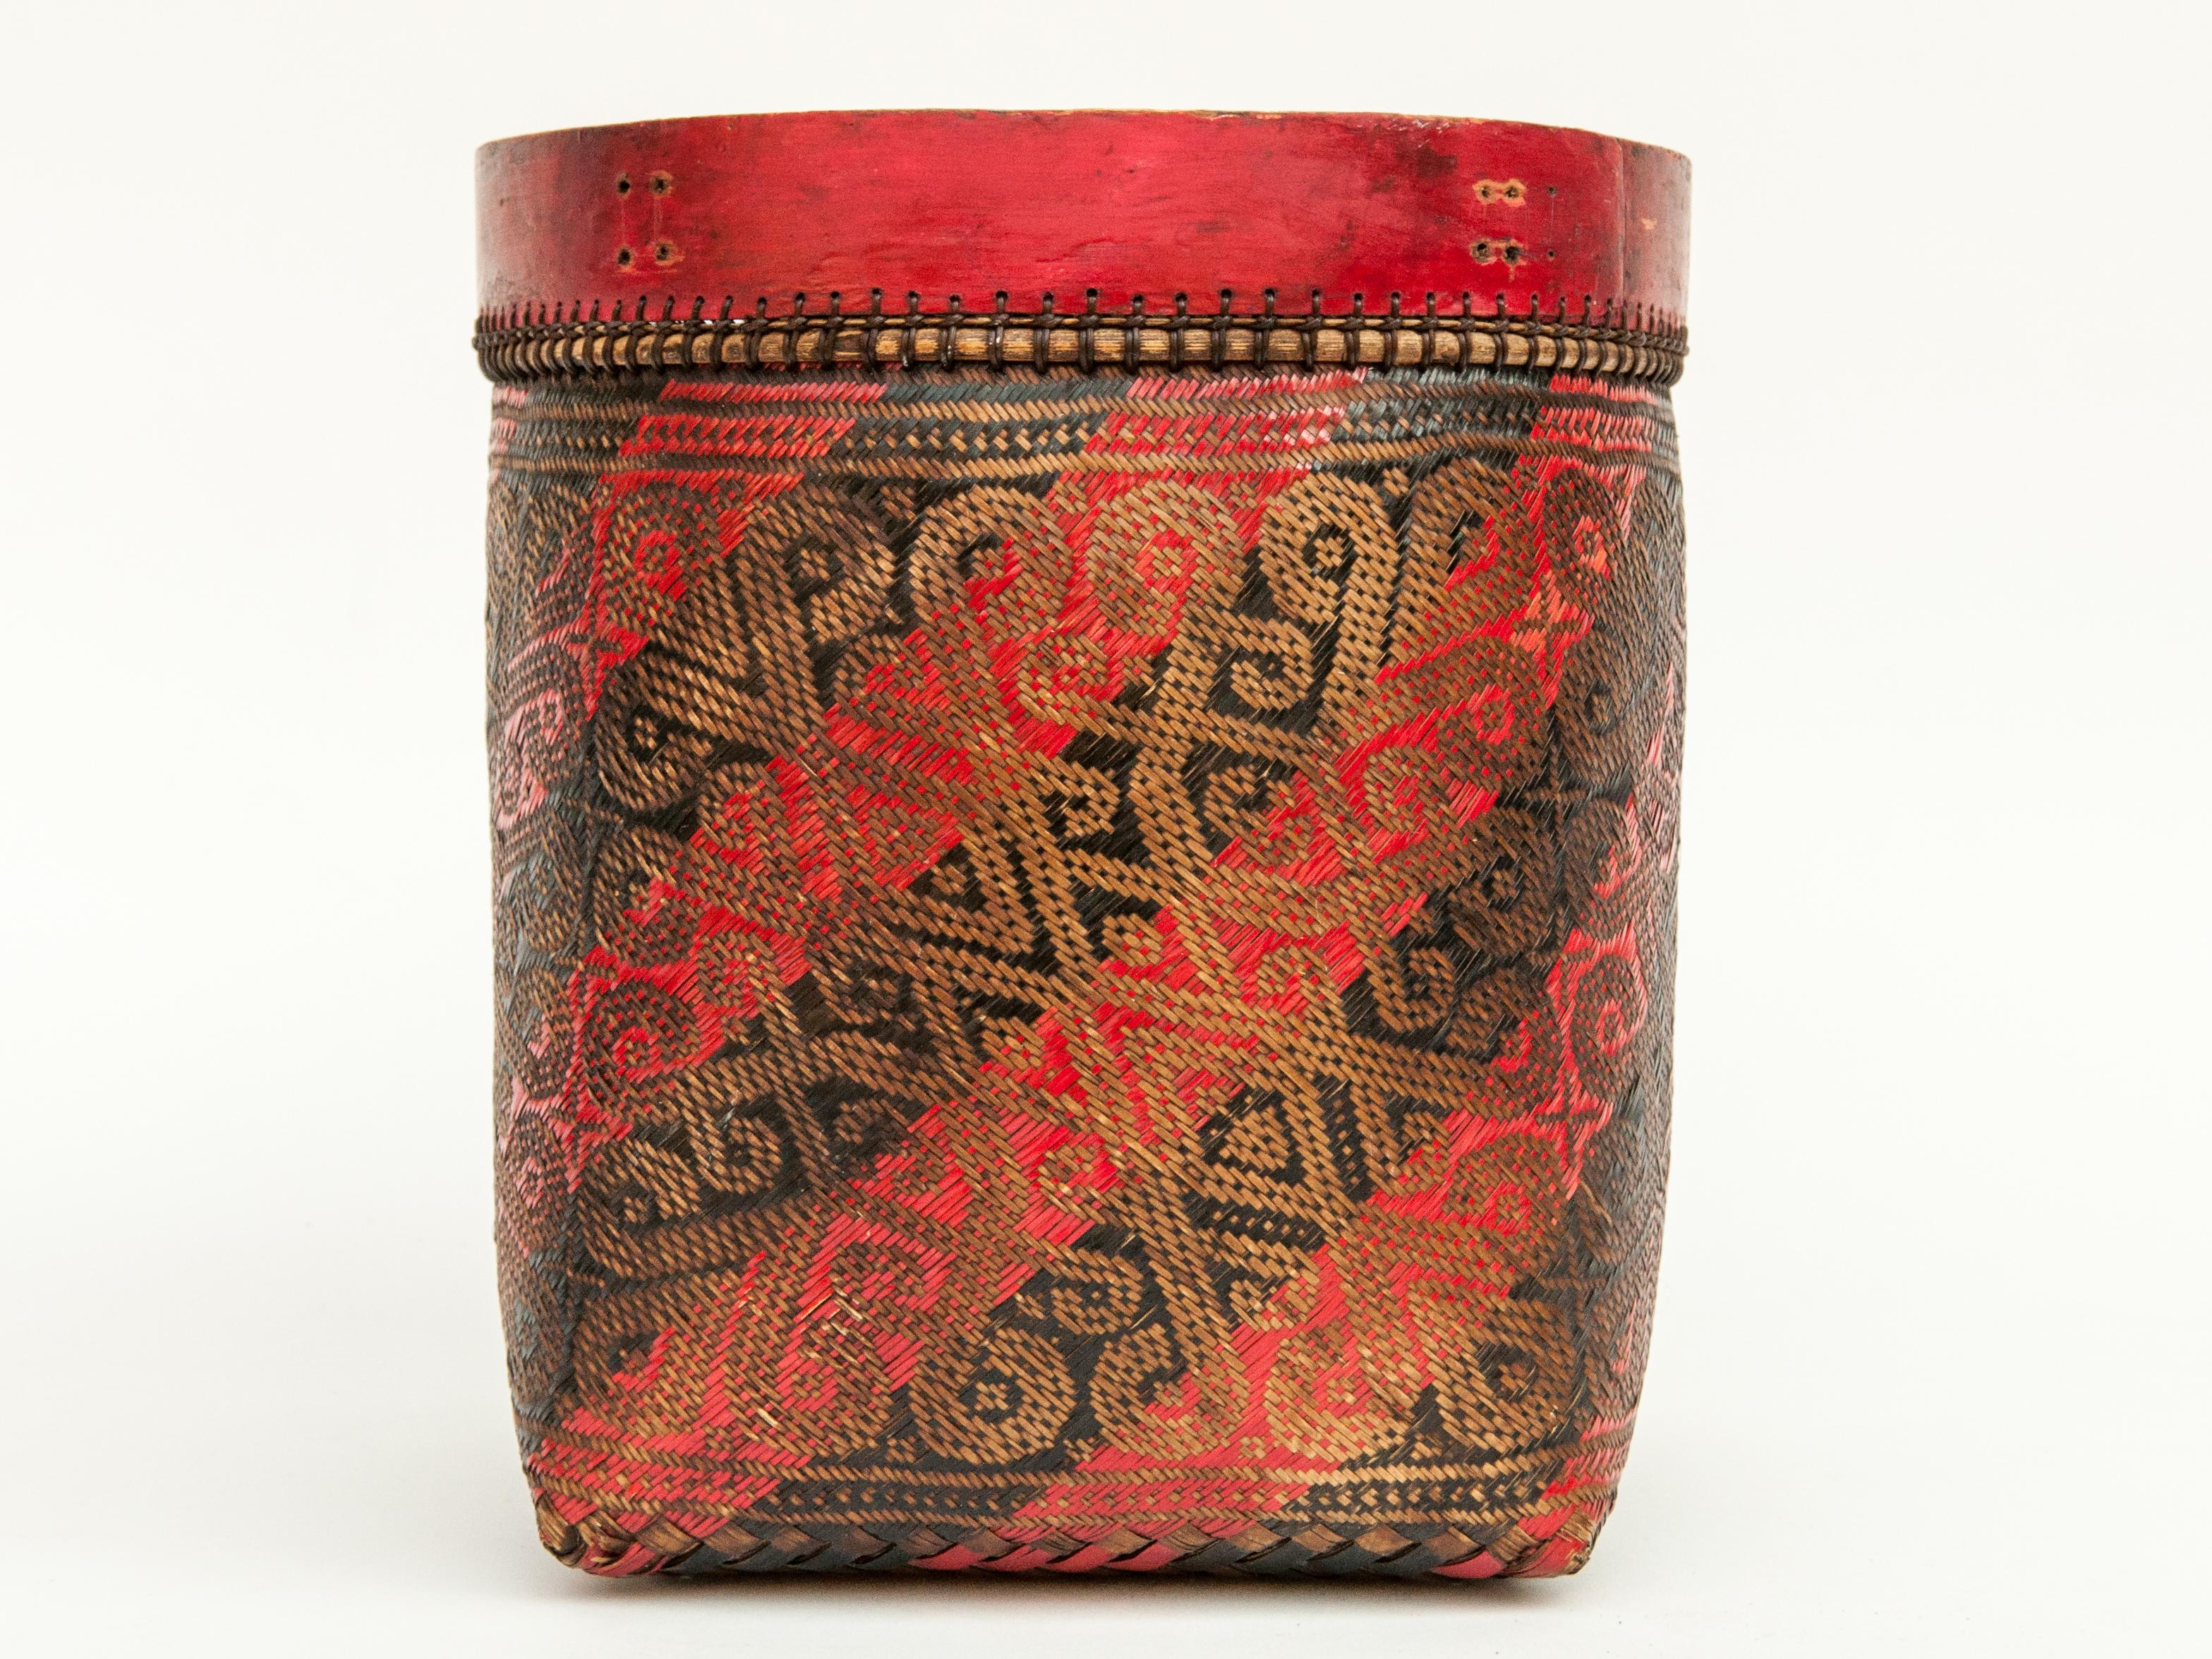 Indonesian Vintage Seed Basket, with Woven Design, Iban of Borneo, Mid-Late 20th Century